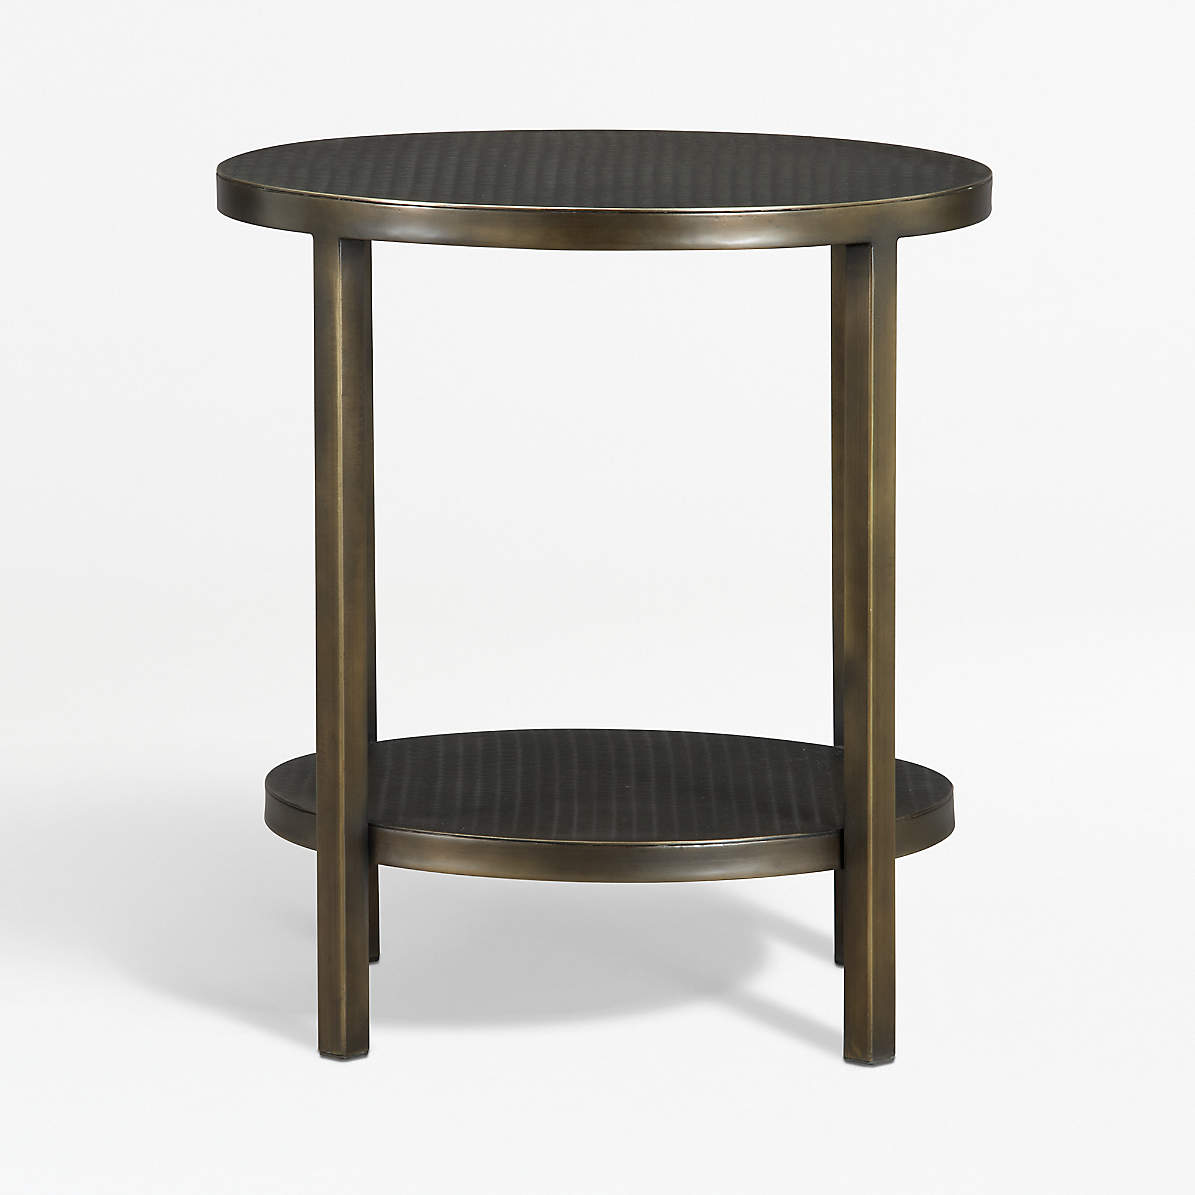 Echelon Round Side Table Reviews, Round Drum Table With Storage